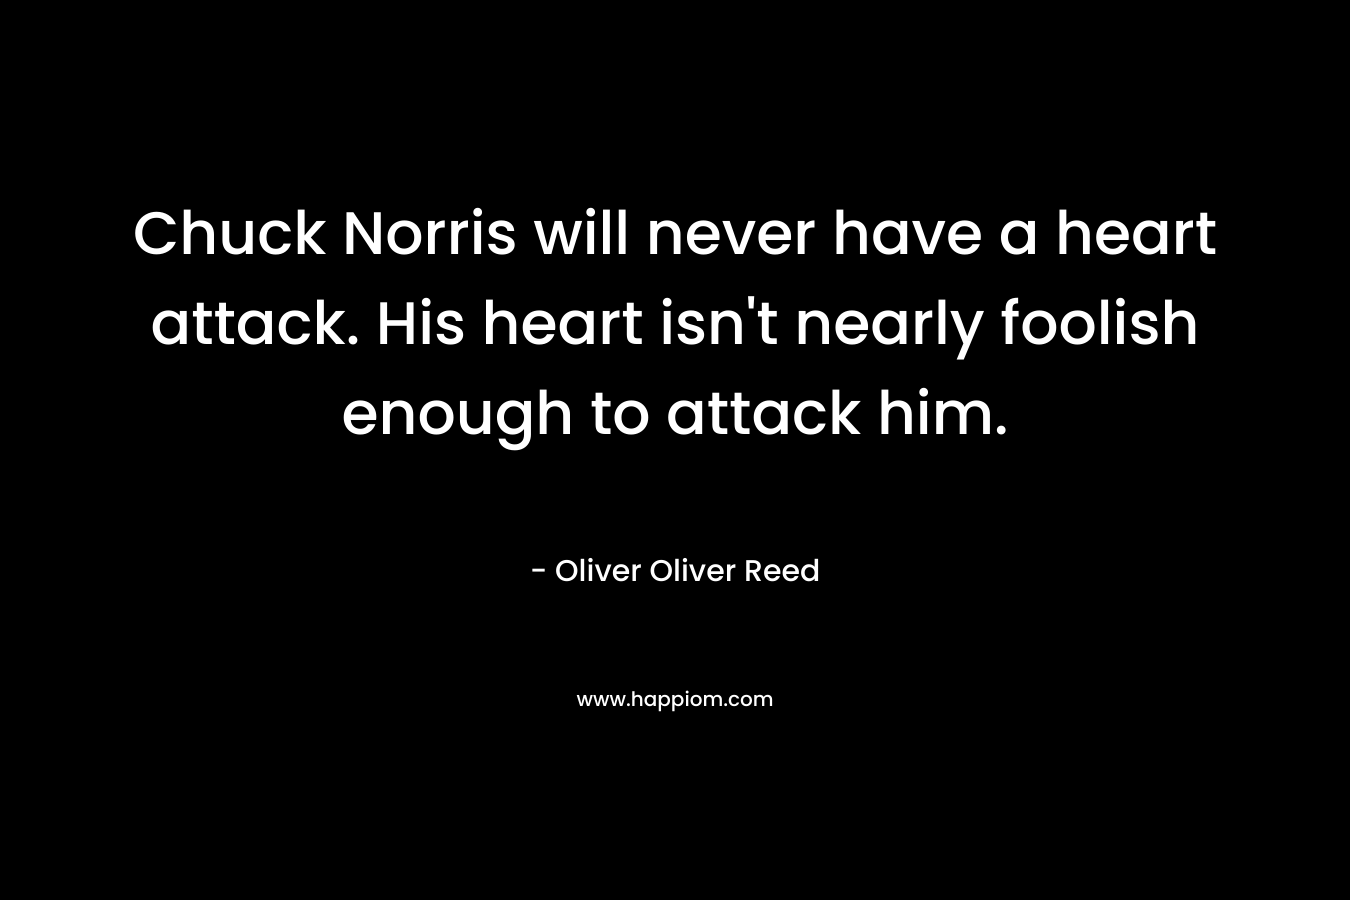 Chuck Norris will never have a heart attack. His heart isn't nearly foolish enough to attack him.